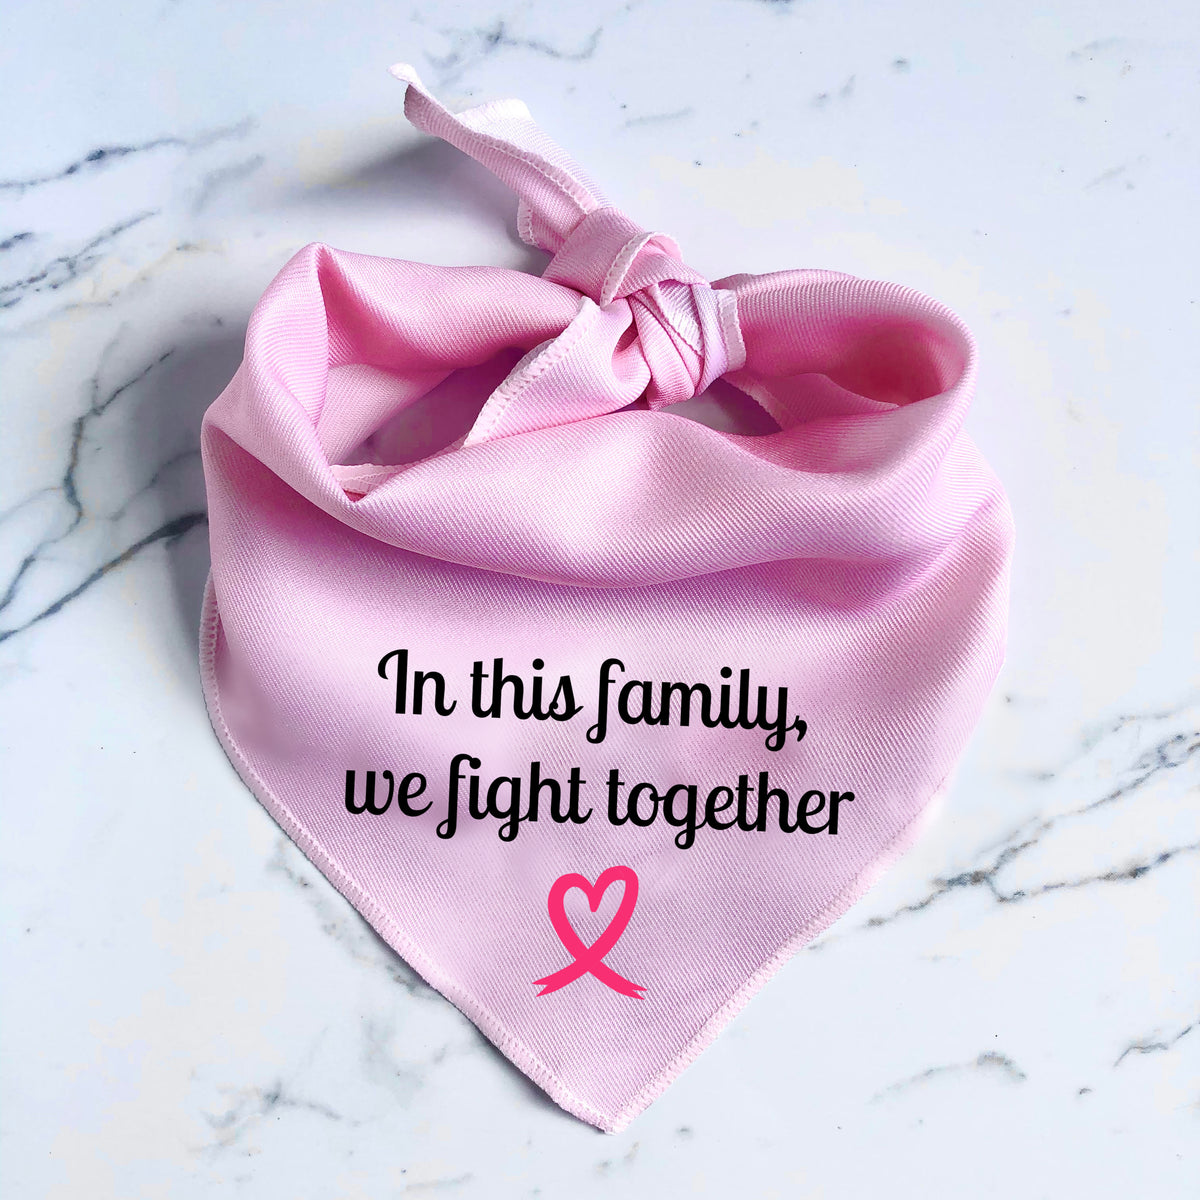 Cancer Dog Bandana - In this Family We Fight Together - Cancer Support Dog Bandana